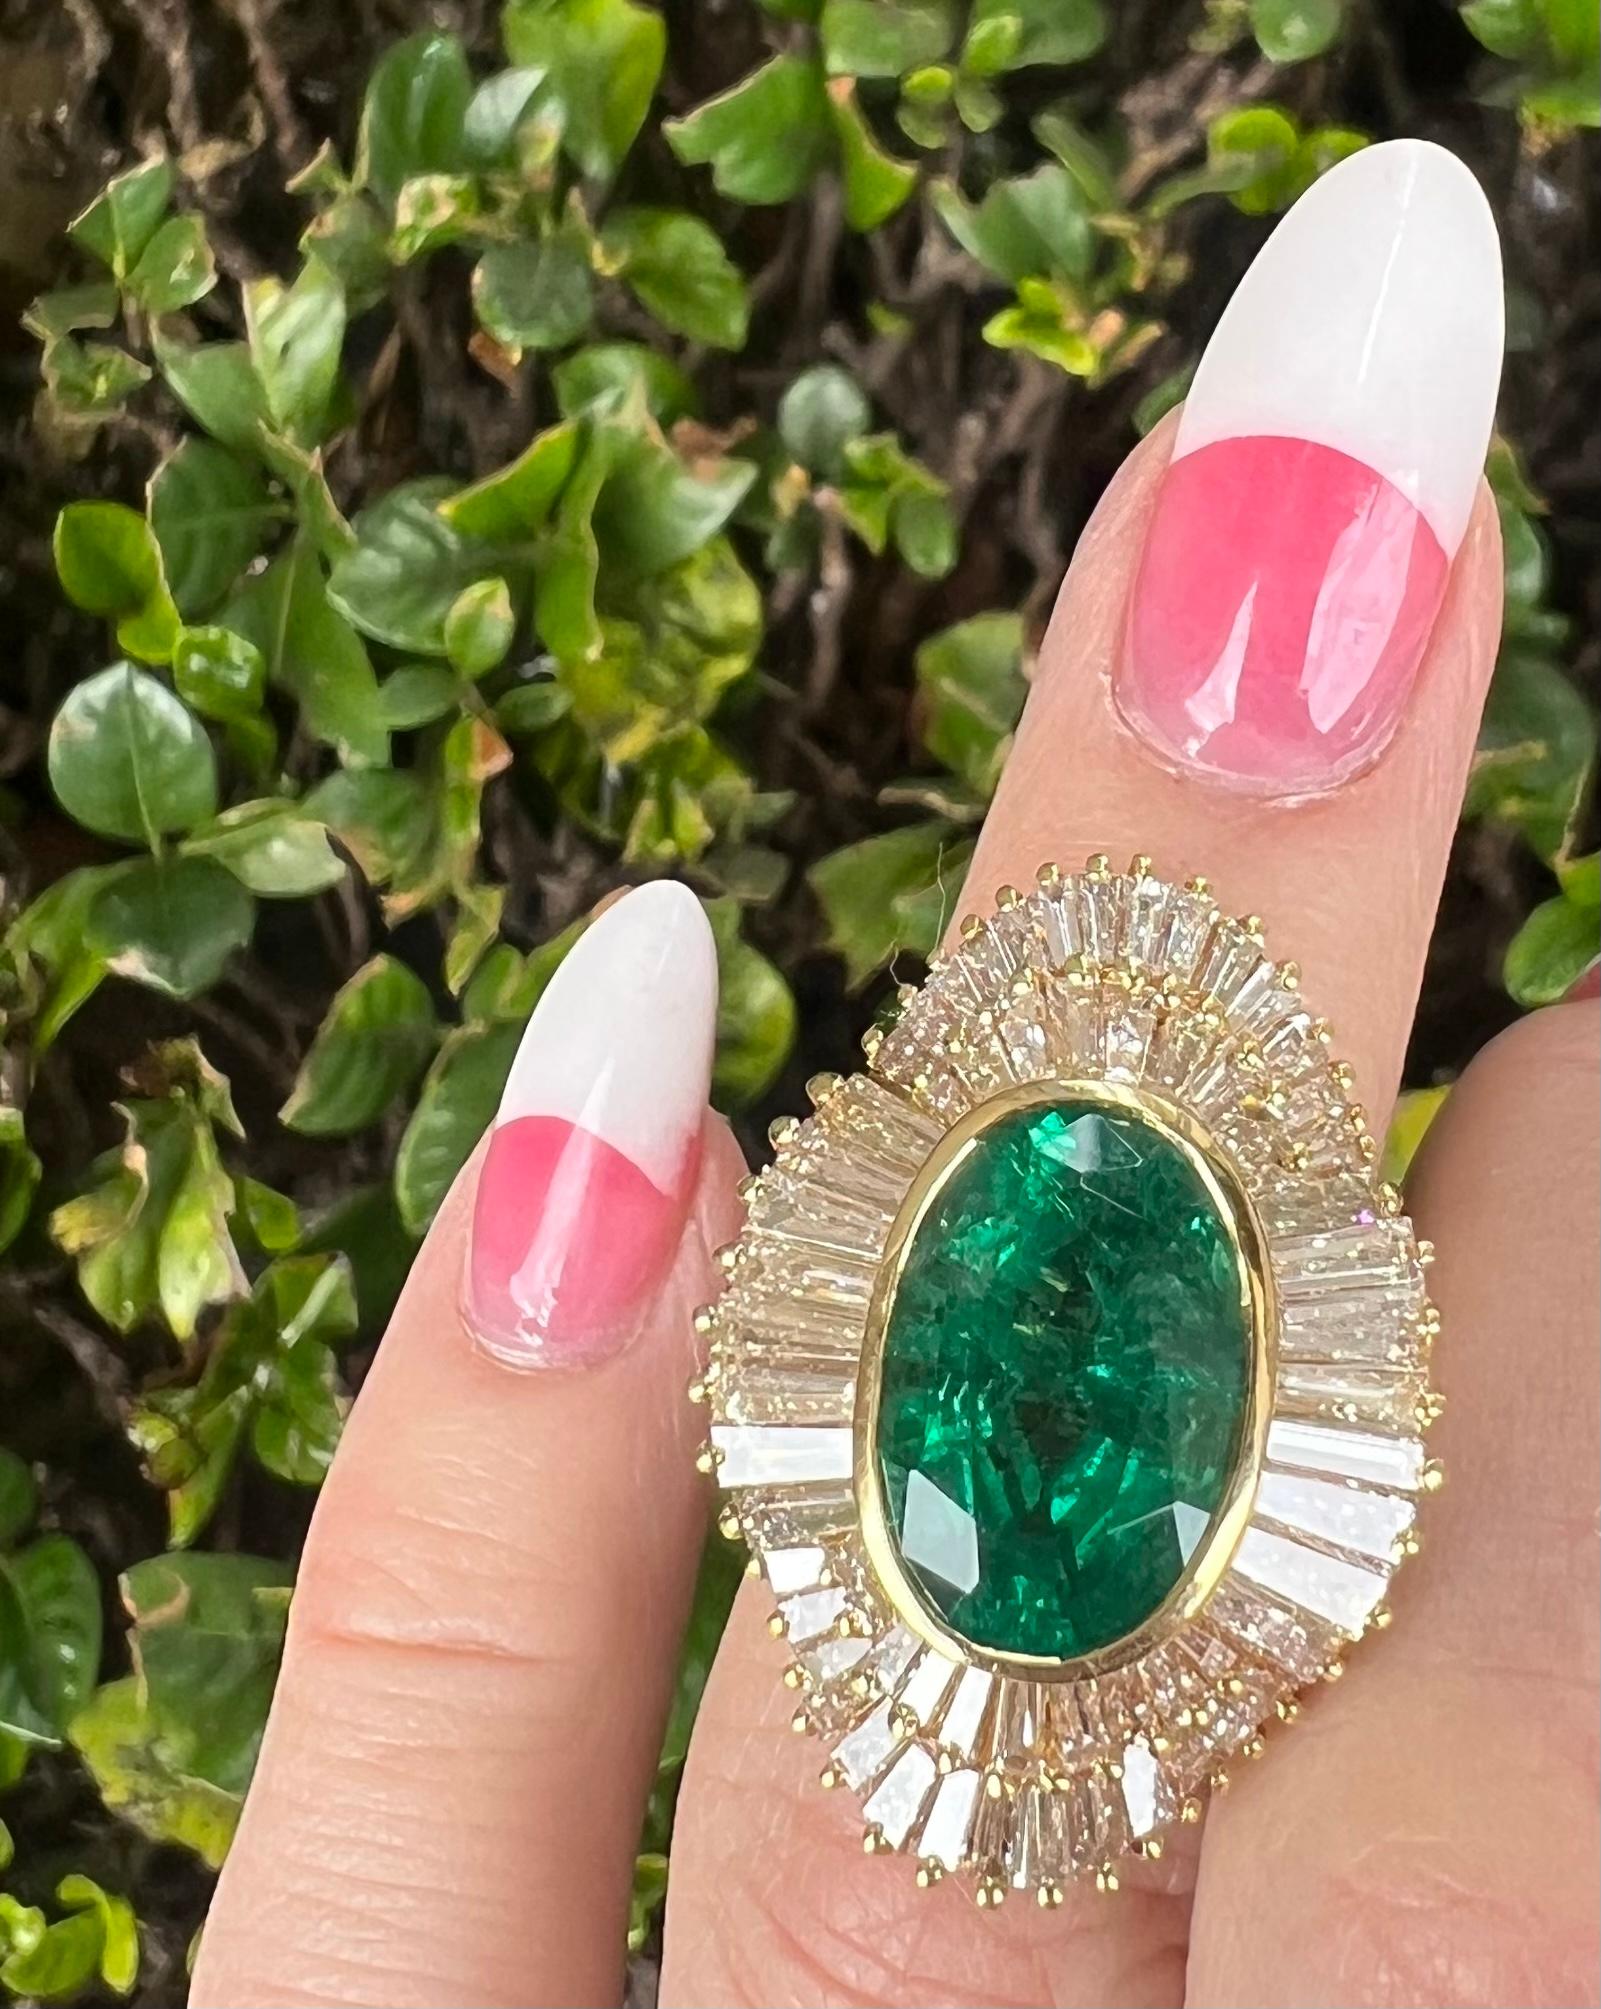 A sensational, stately and impressive 15 carat estate cocktail ring features a very large facing 9 carat oval cut natural Columbian emerald with the most beautiful vivid green color, safely bezel set and surrounded by a sparkling halo of ruffled